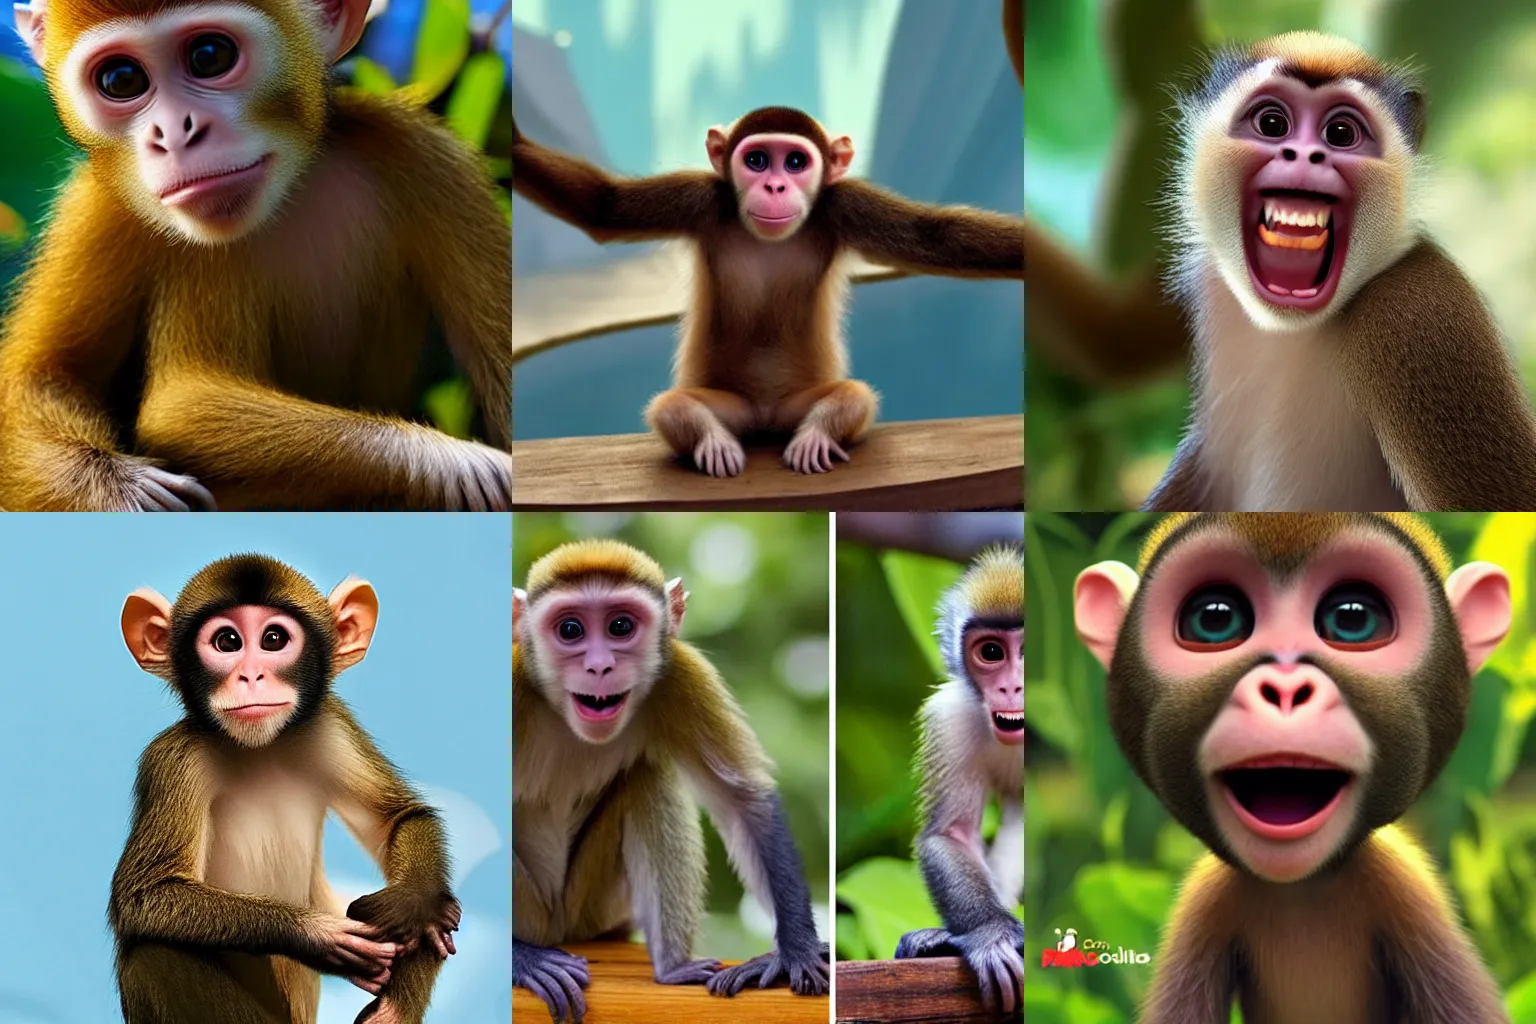 Prompt: screaming excited capuchin monkey in Soul pixar film 2020